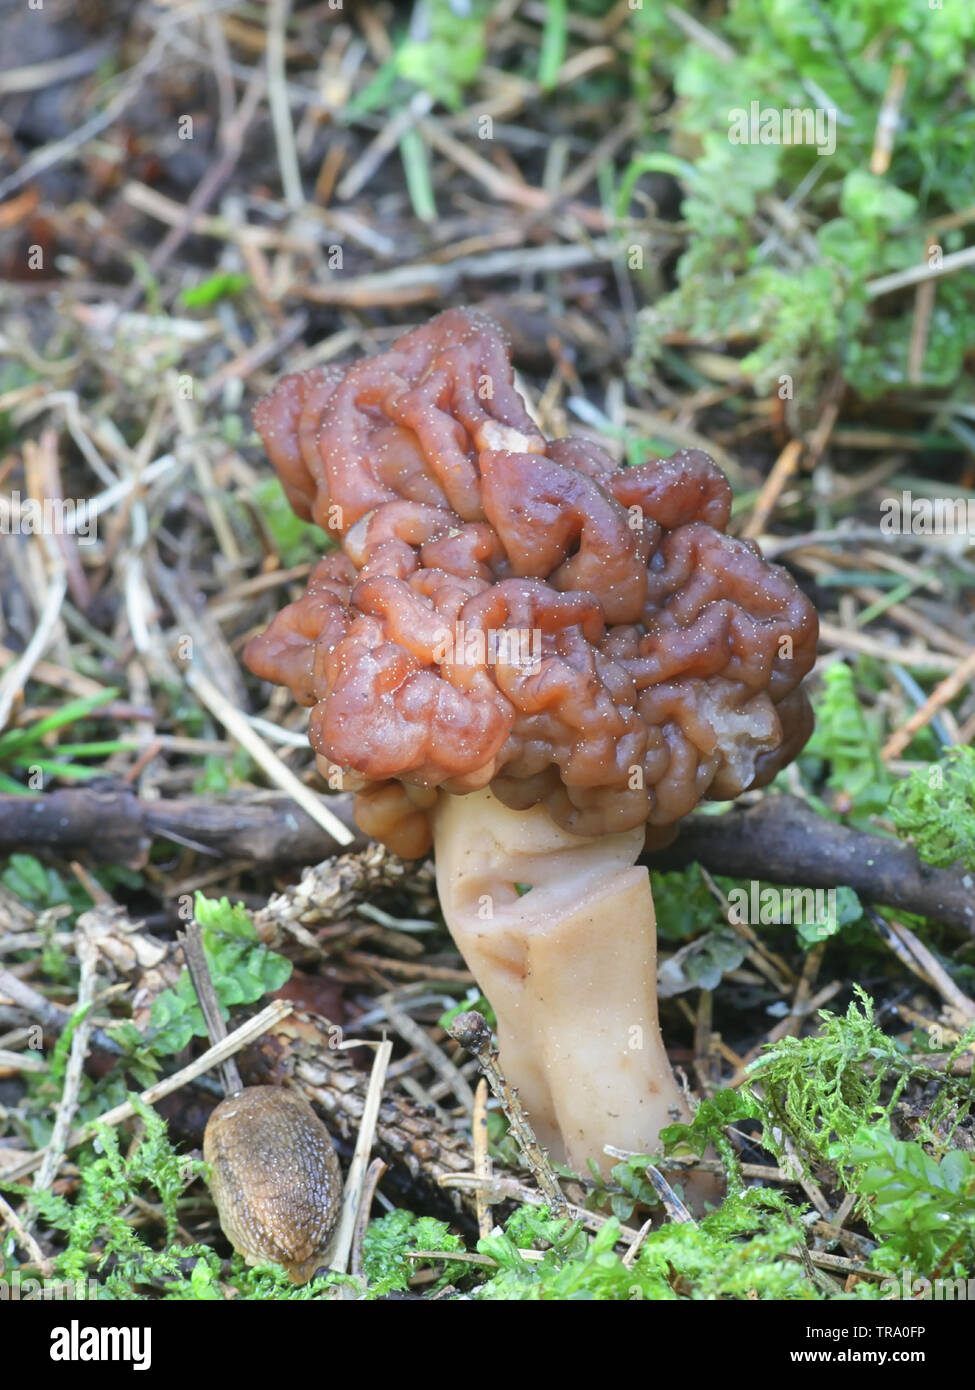 Gyromitra esculenta, known as the False Morel, a wild mushroom from Finland Stock Photo